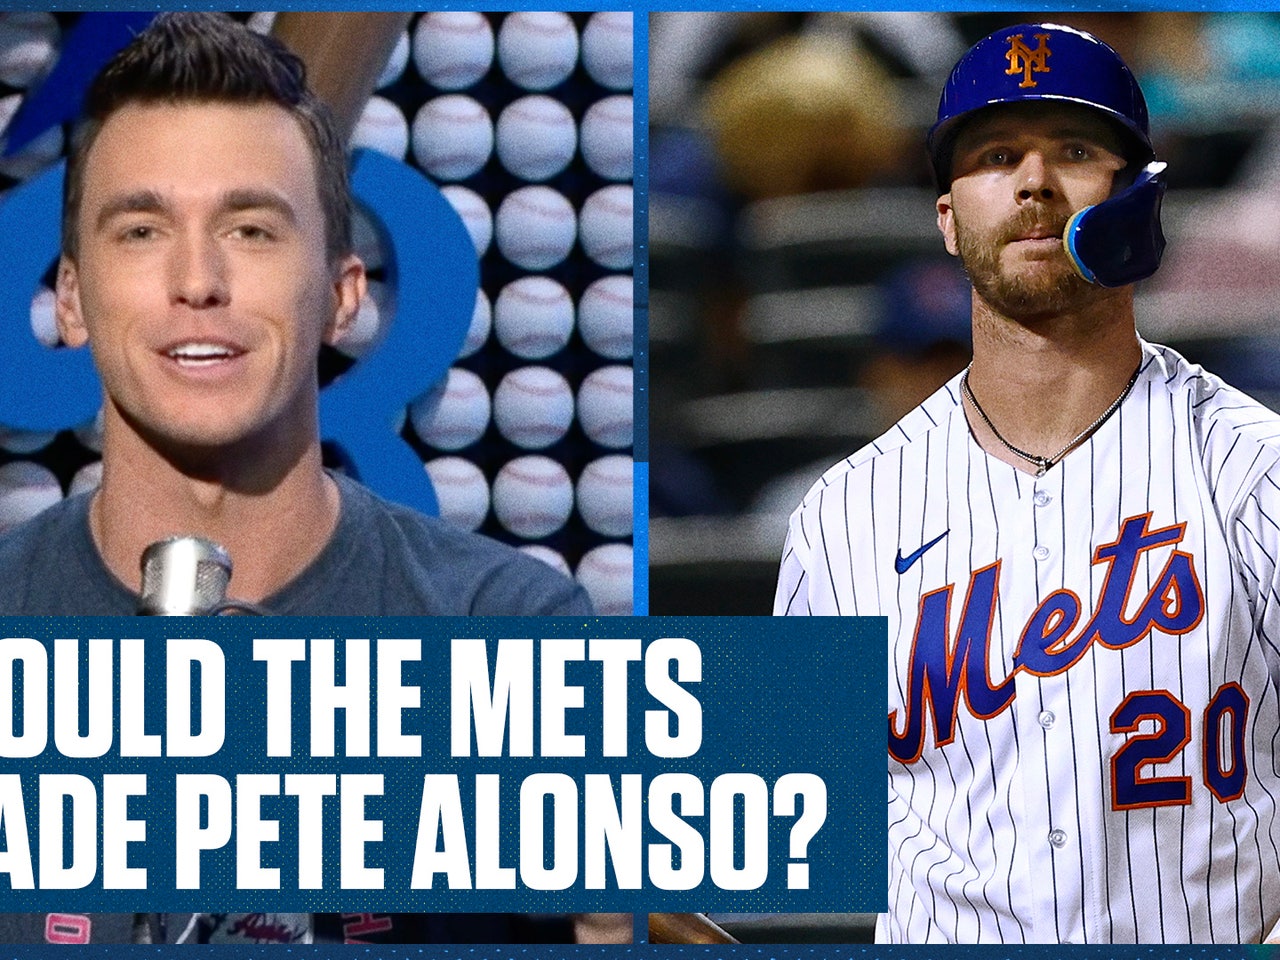 From Pete Alonso to Texas Pete